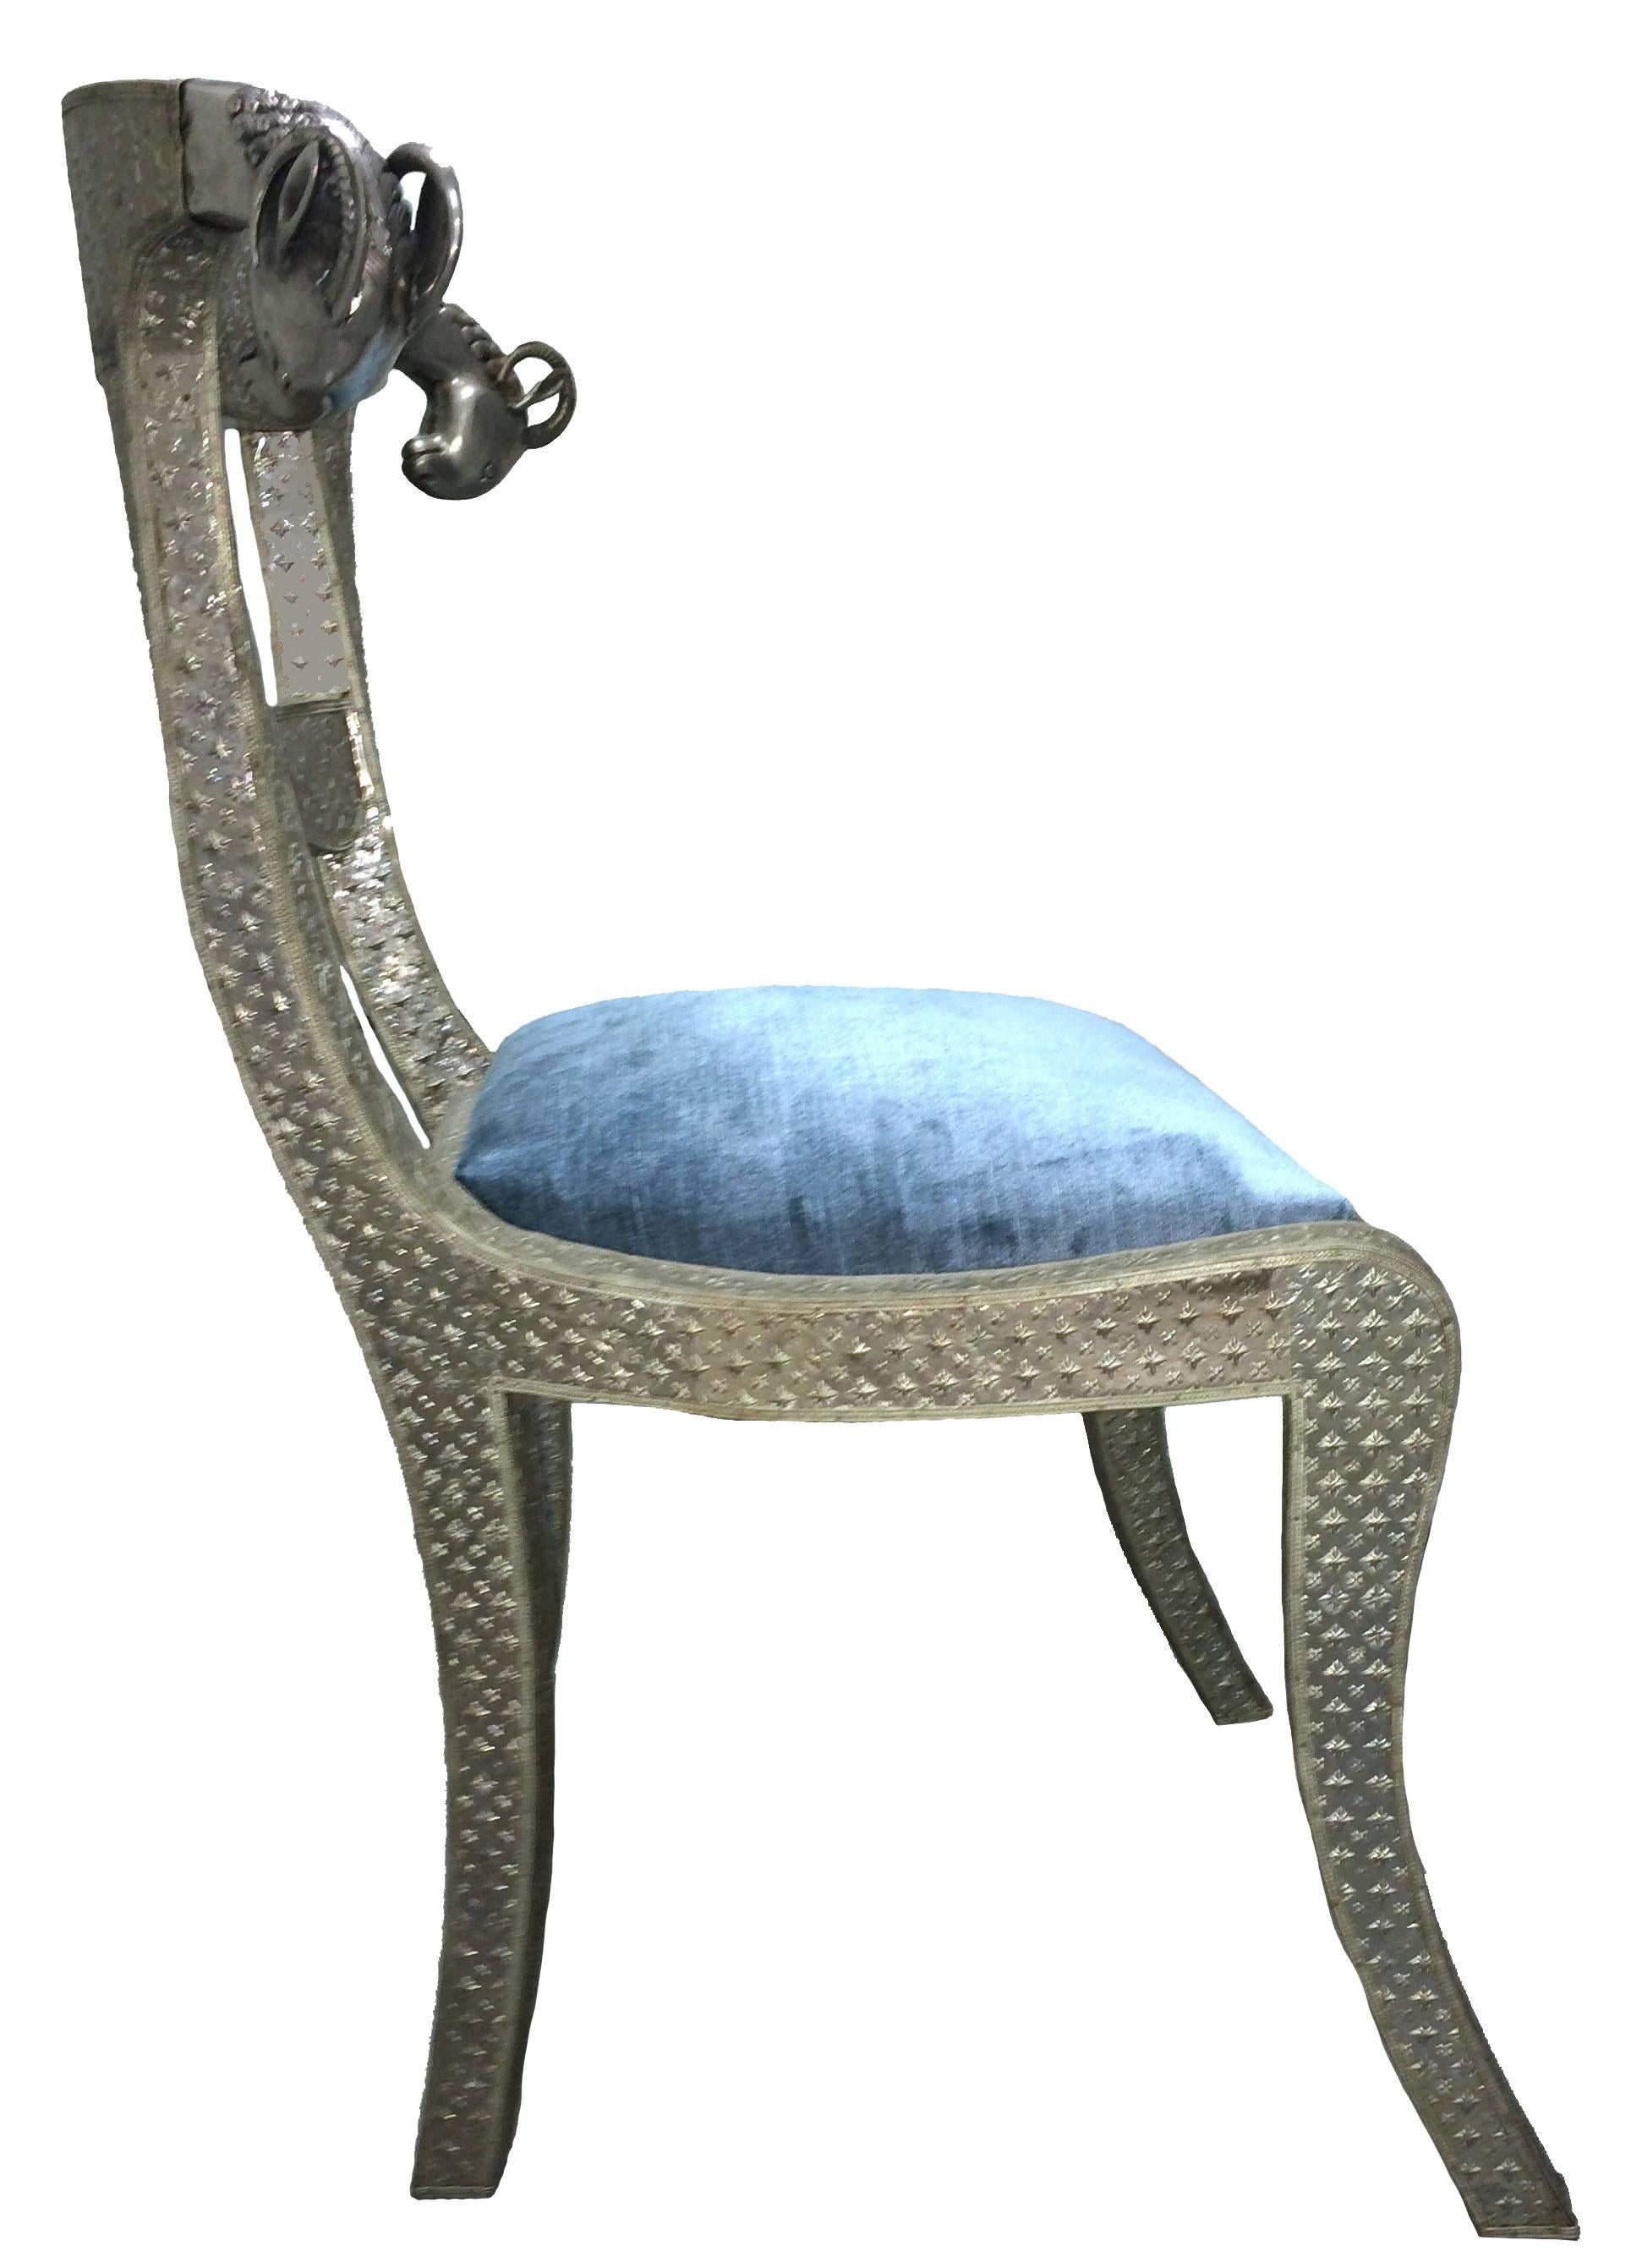 Anglo-Indian Indian Repoussé Ram's Head Side Chair